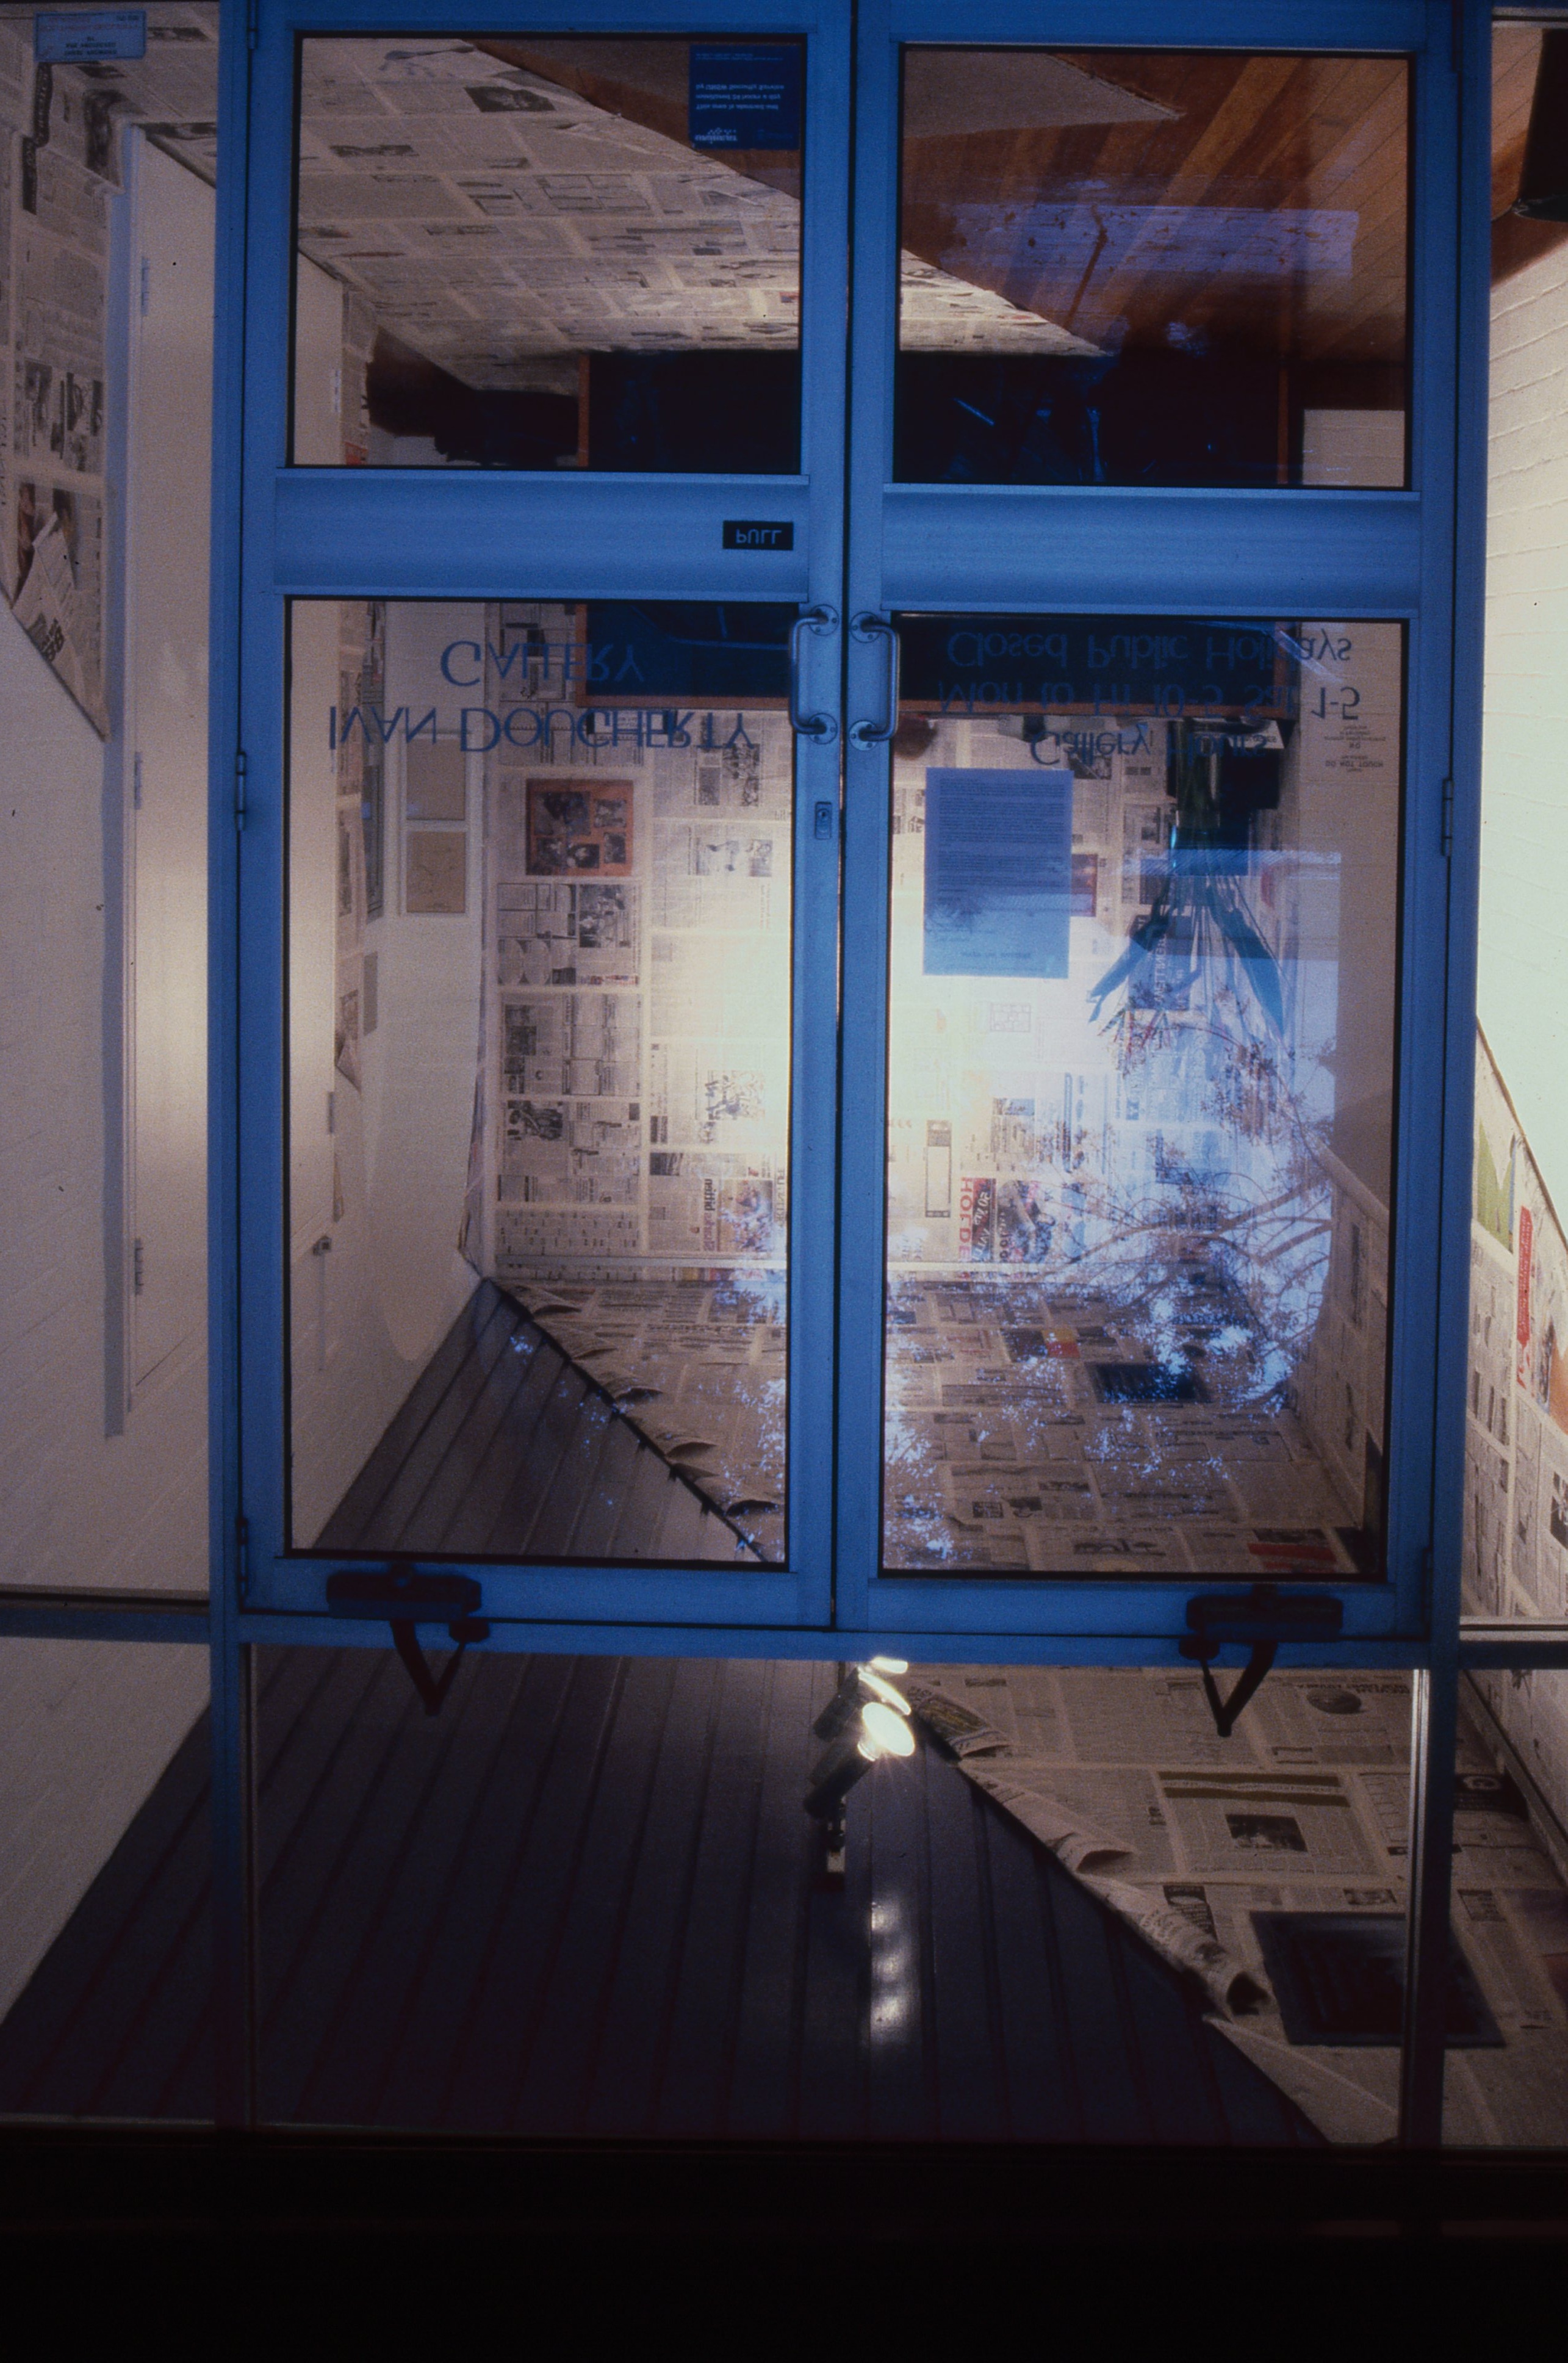 idg_archive_1998_after_the_masters_mfa_1993-1997_selected_work-003_install.jpg